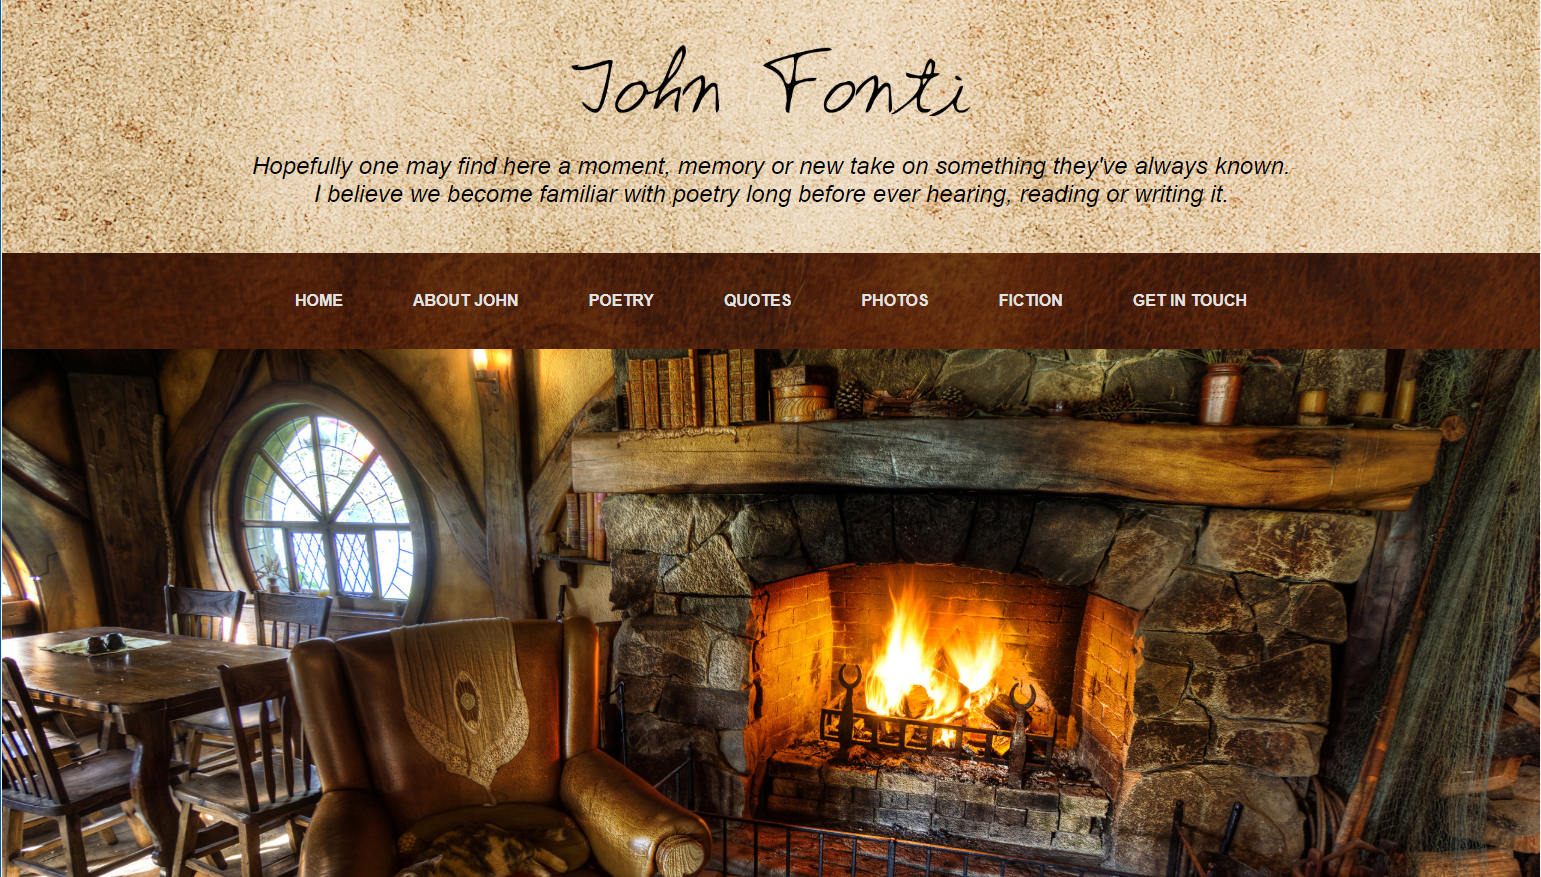 John Fonti Photography and Writing website designed by Phalen Creative